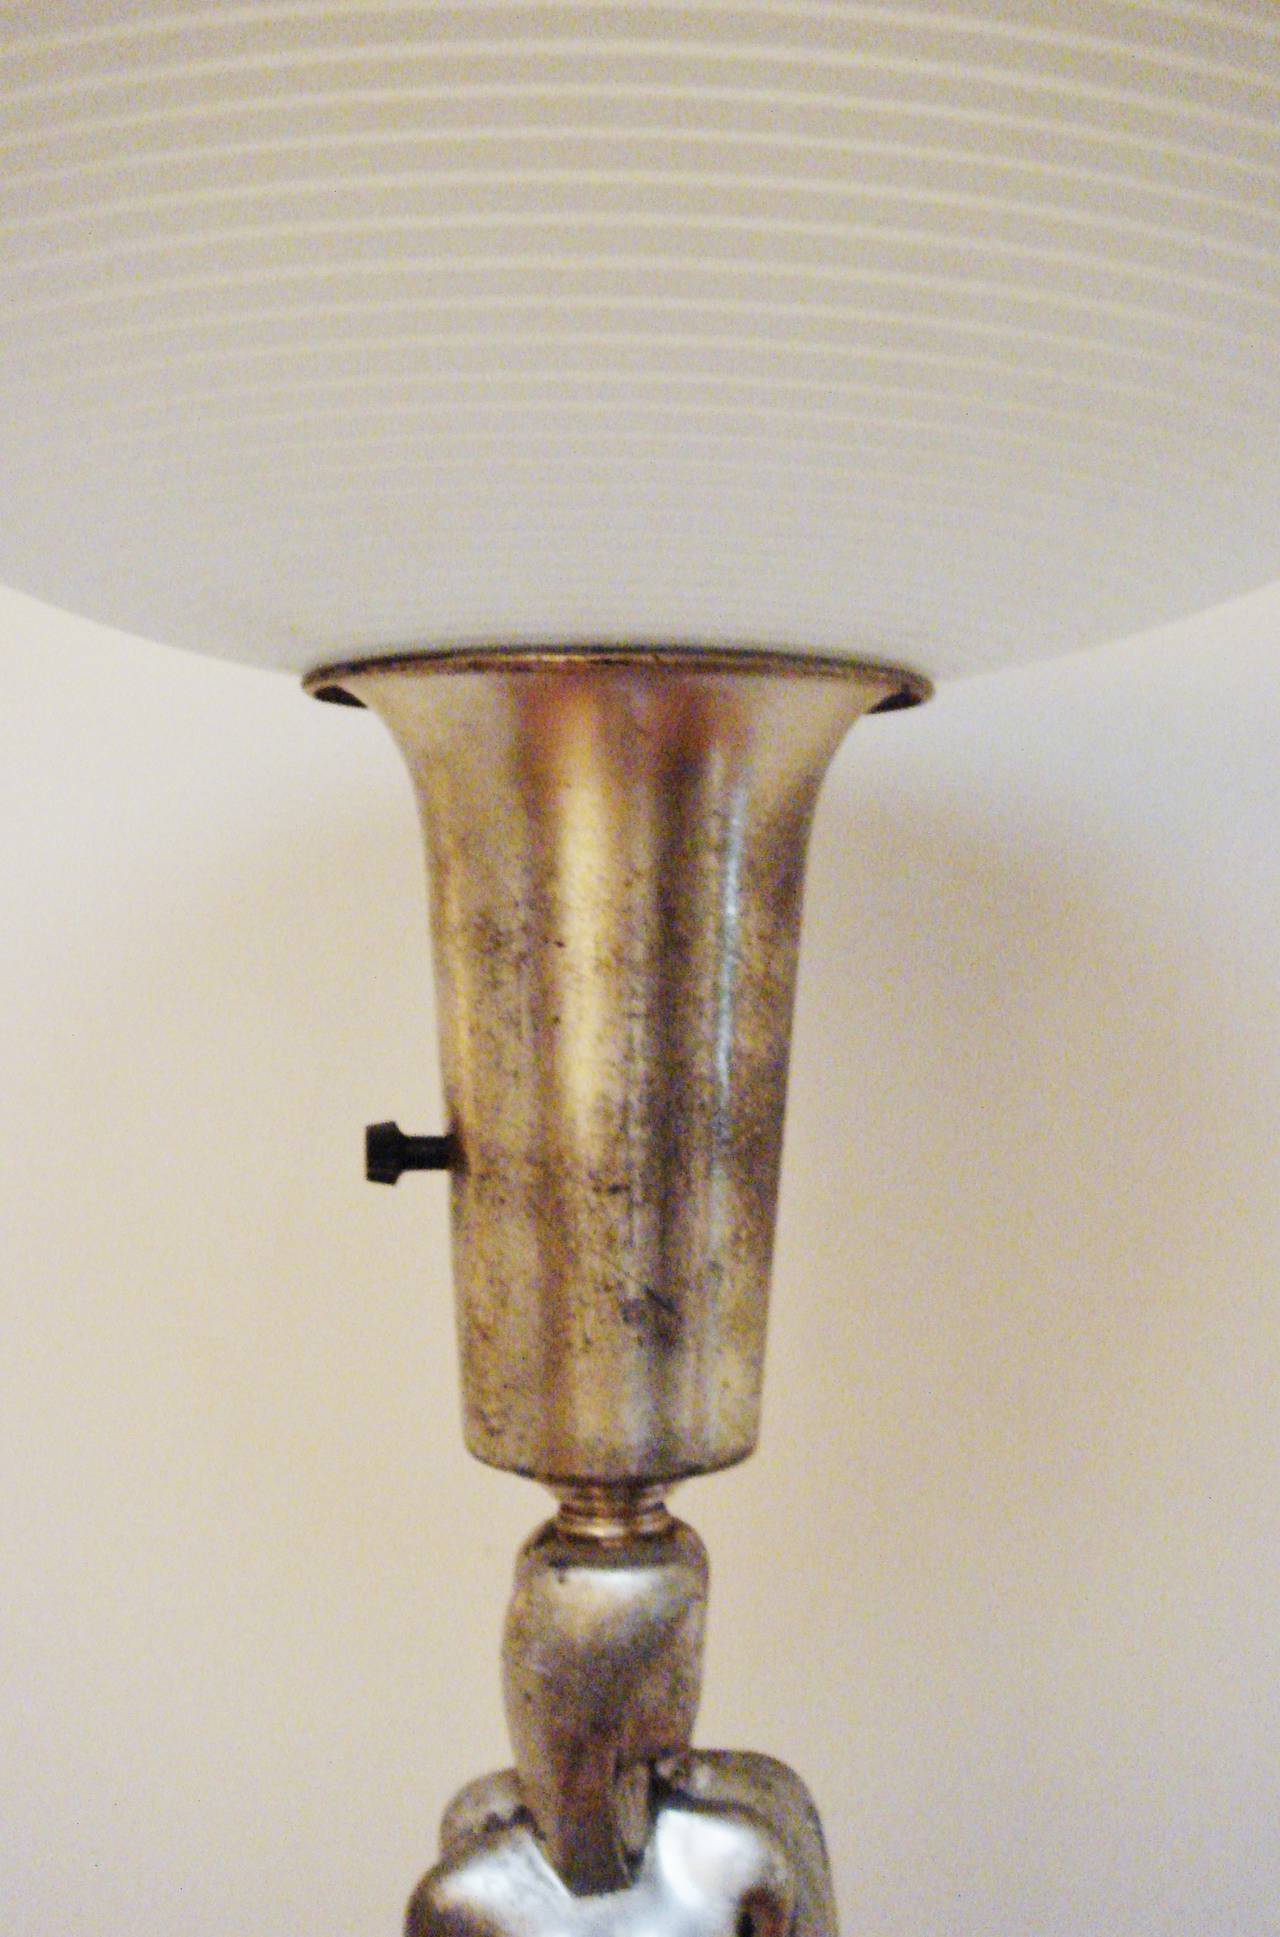 This very rare American Art Deco nickel-plated figurative torchiere/uplighter was designed for the Colonial Premier Lamp Company by Viktor Schreckengost. It features a stylized pair of male and female nudes standing back to back at the top of the